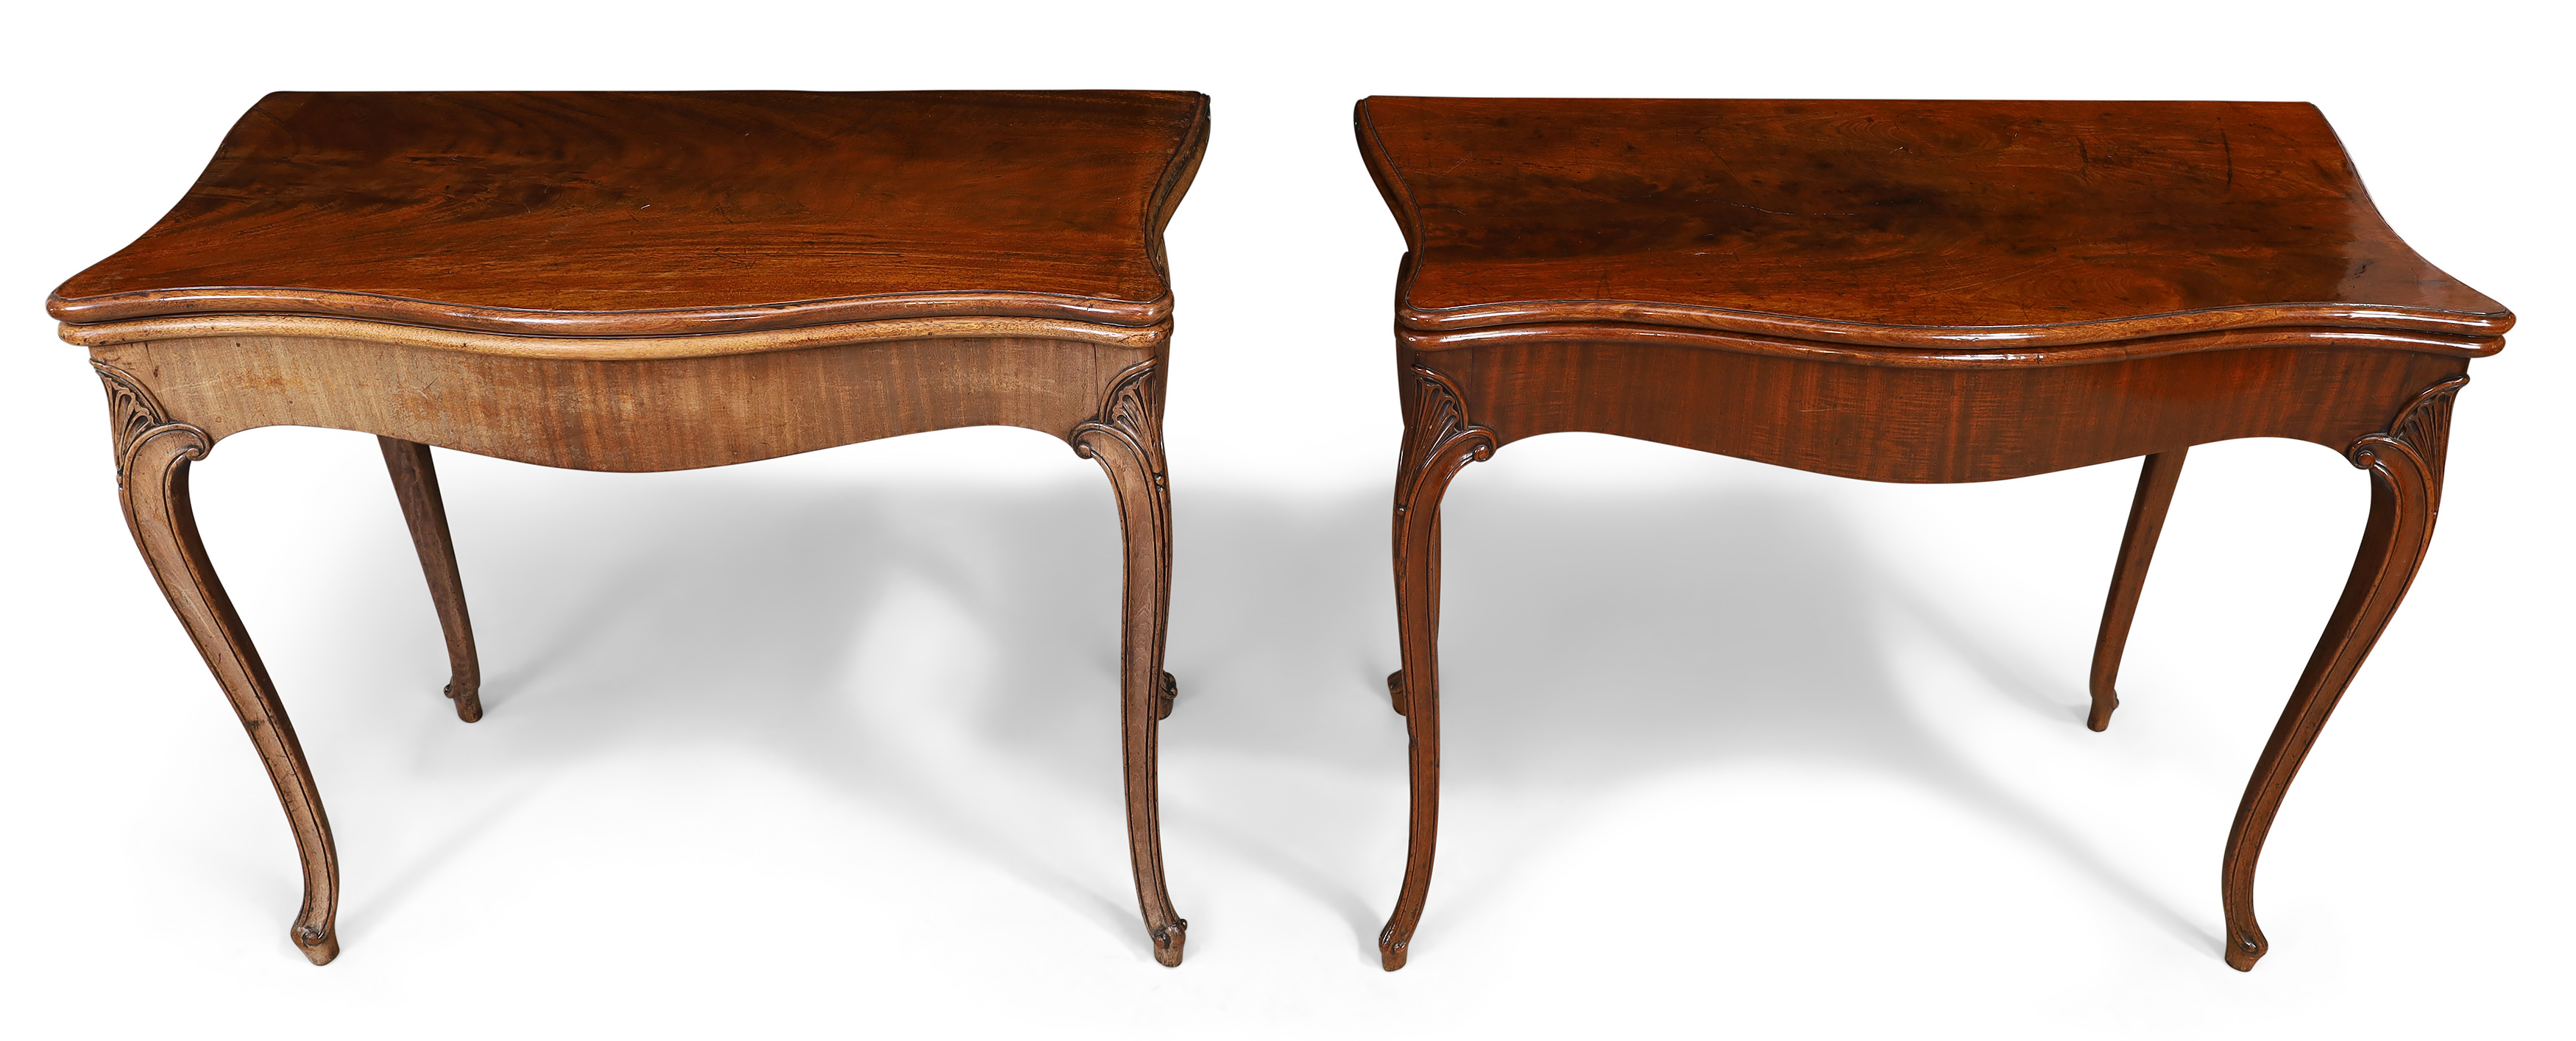 A near pair of George III mahogany serpentine concertina action tea tables, third quarter 18th ce... - Image 2 of 5